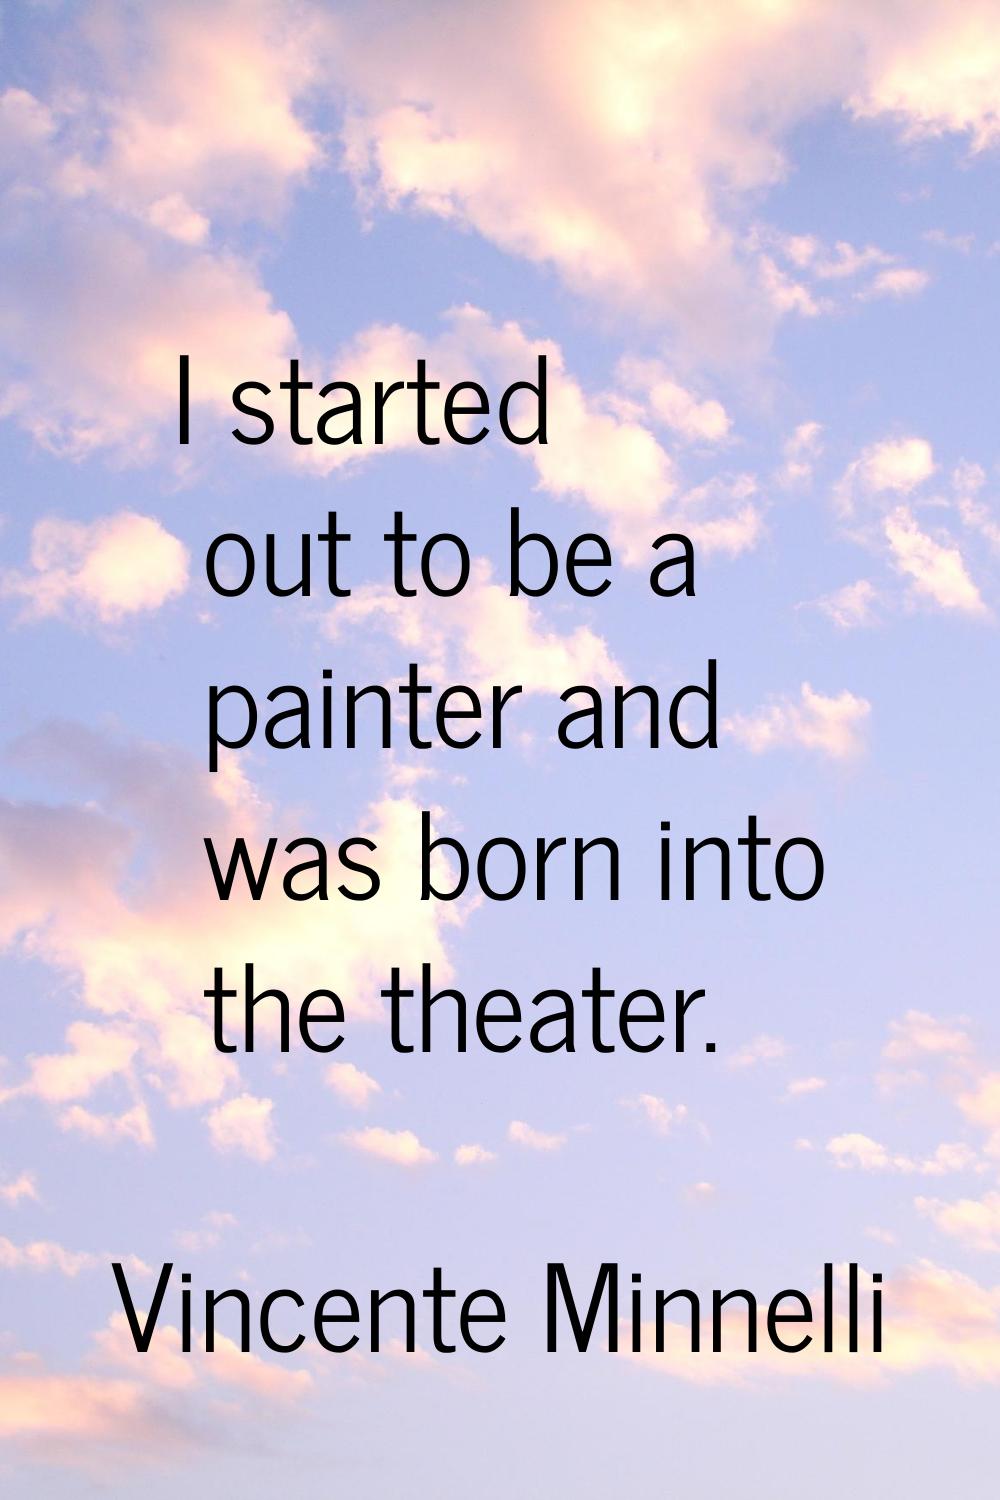 I started out to be a painter and was born into the theater.